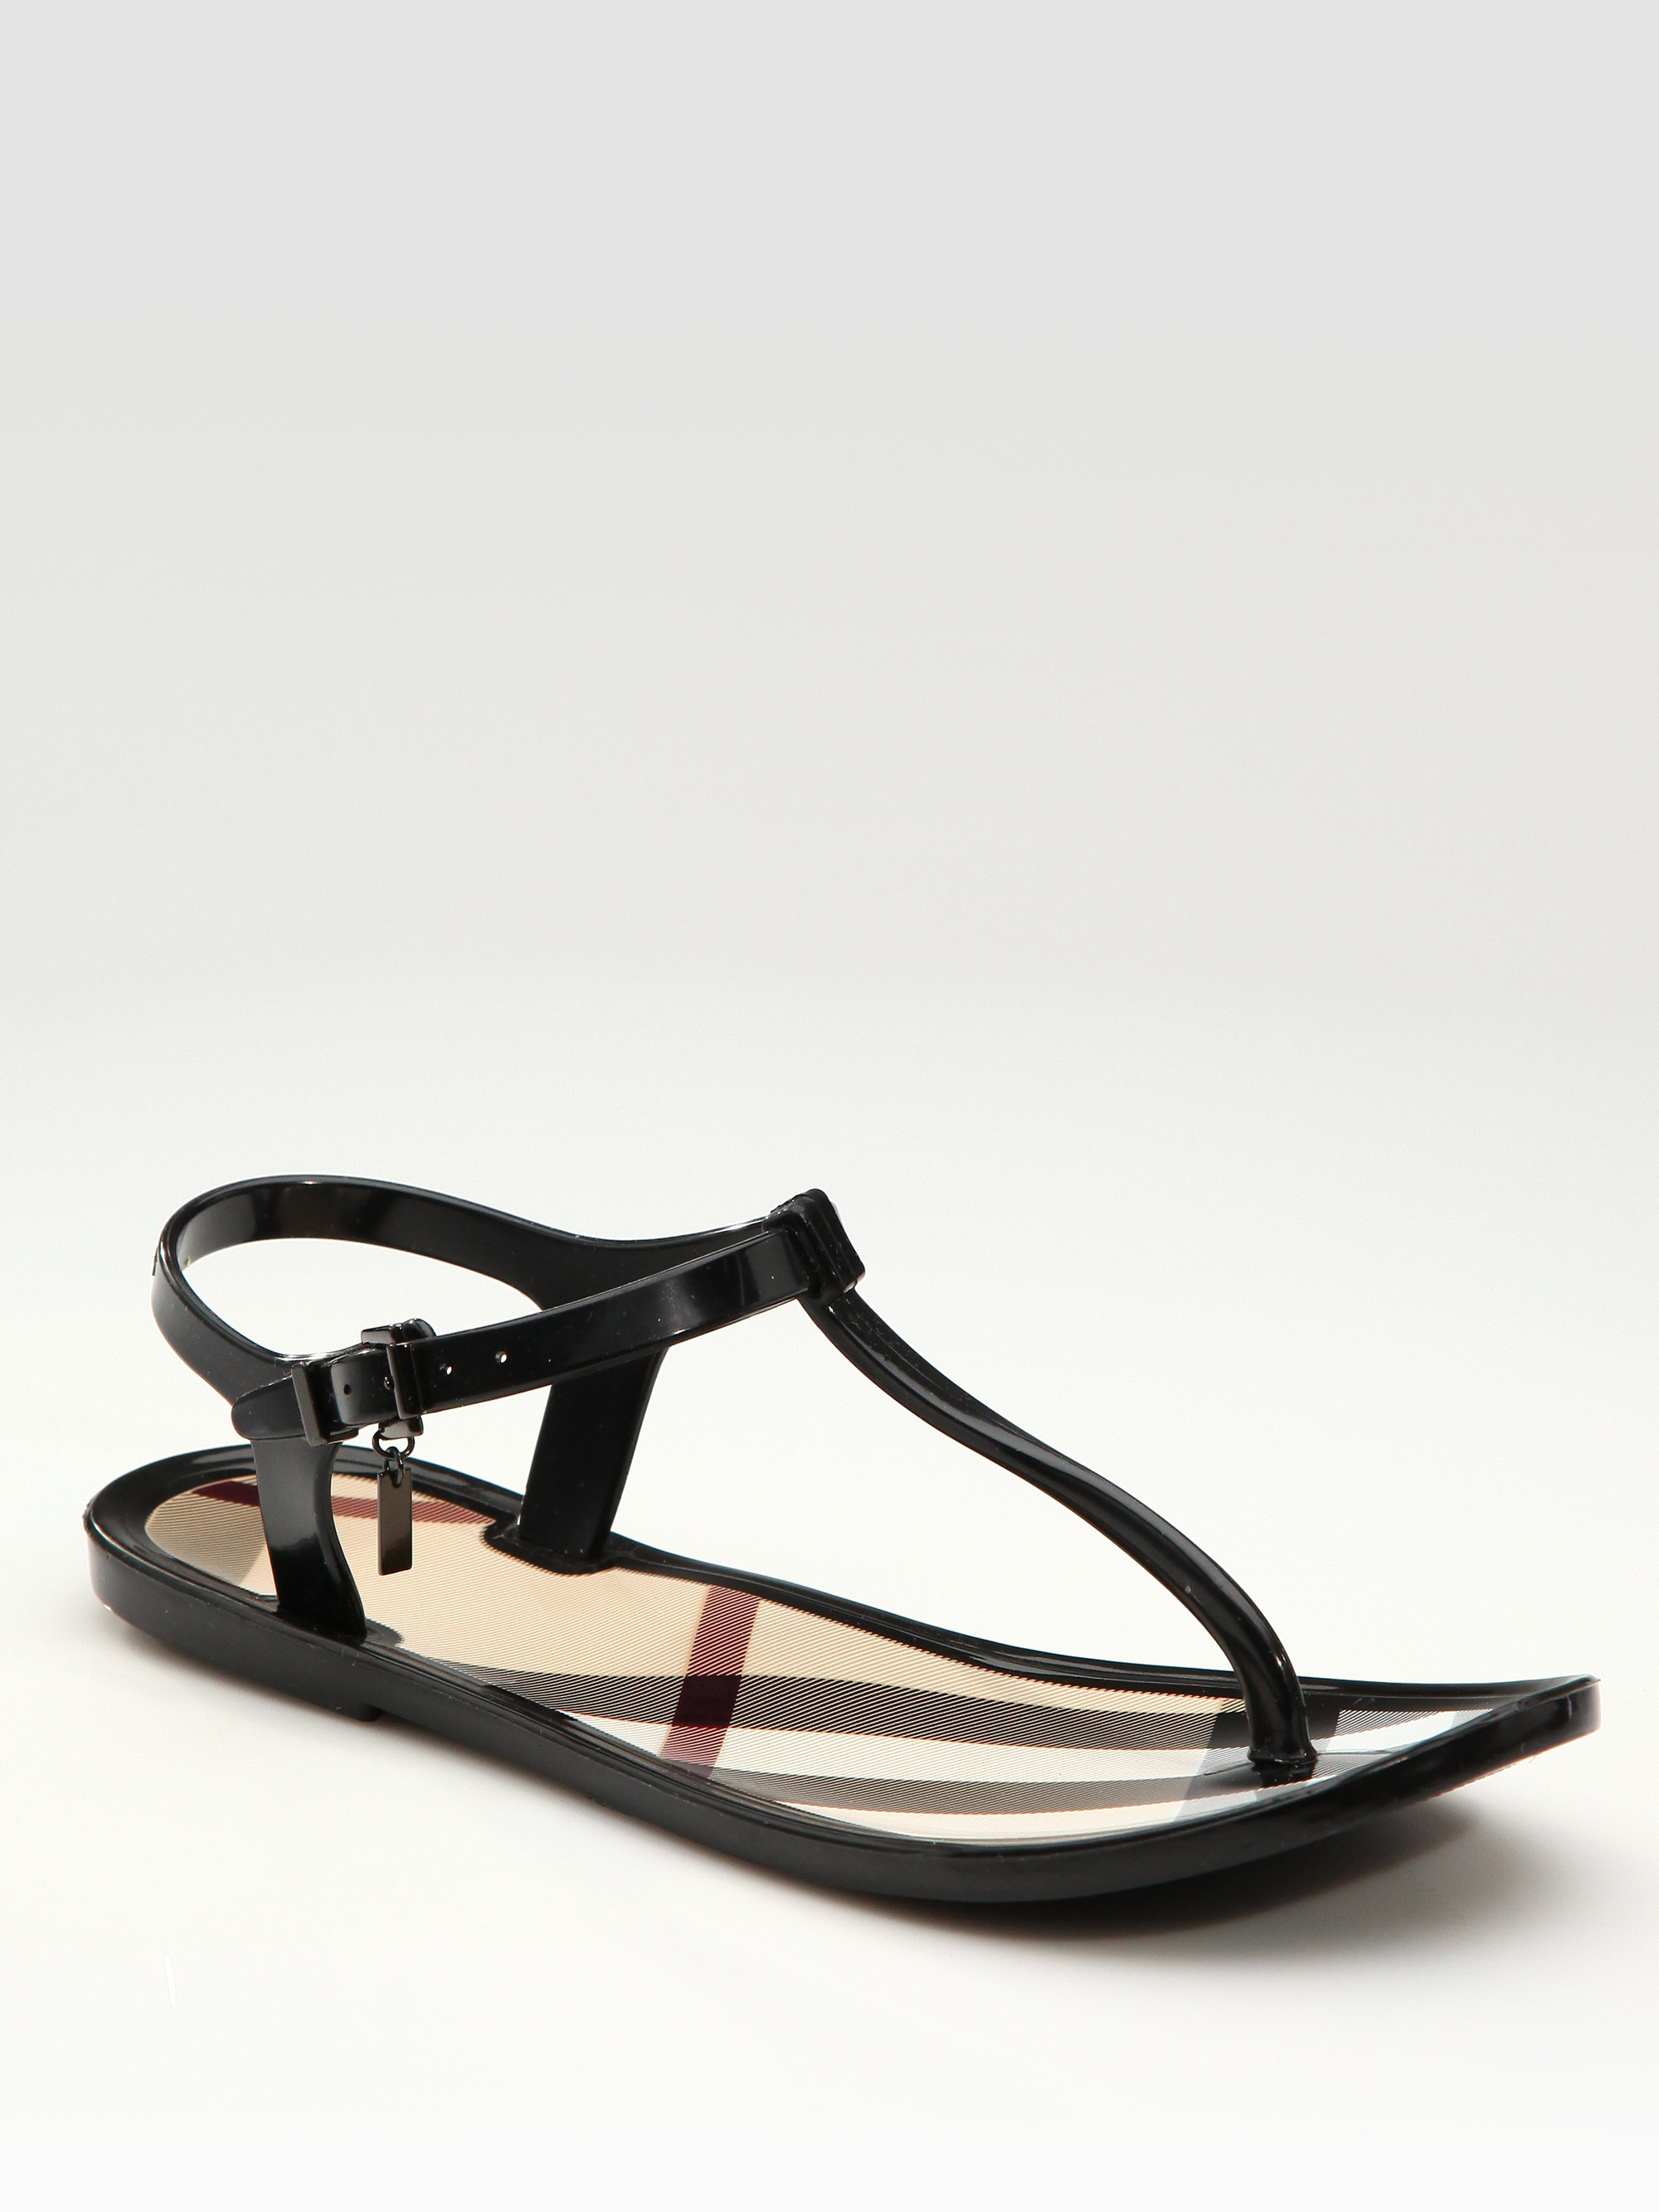 Burberry Rubber Thong Sandals in Black - Lyst